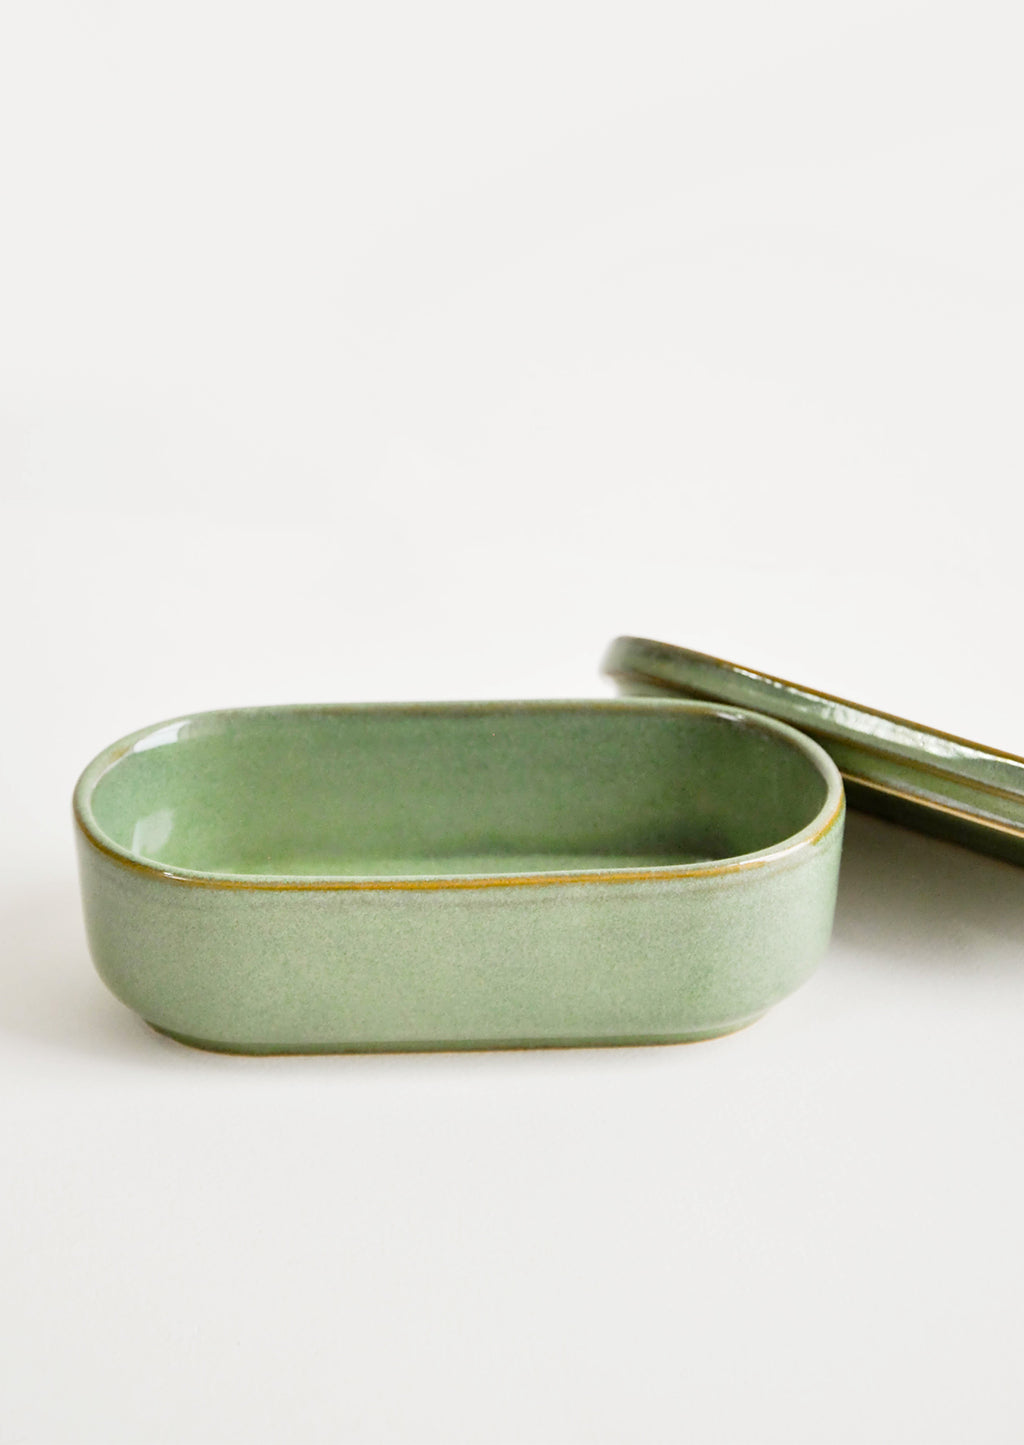 2: Oblong oval ceramic green Container with lid lying by its side.